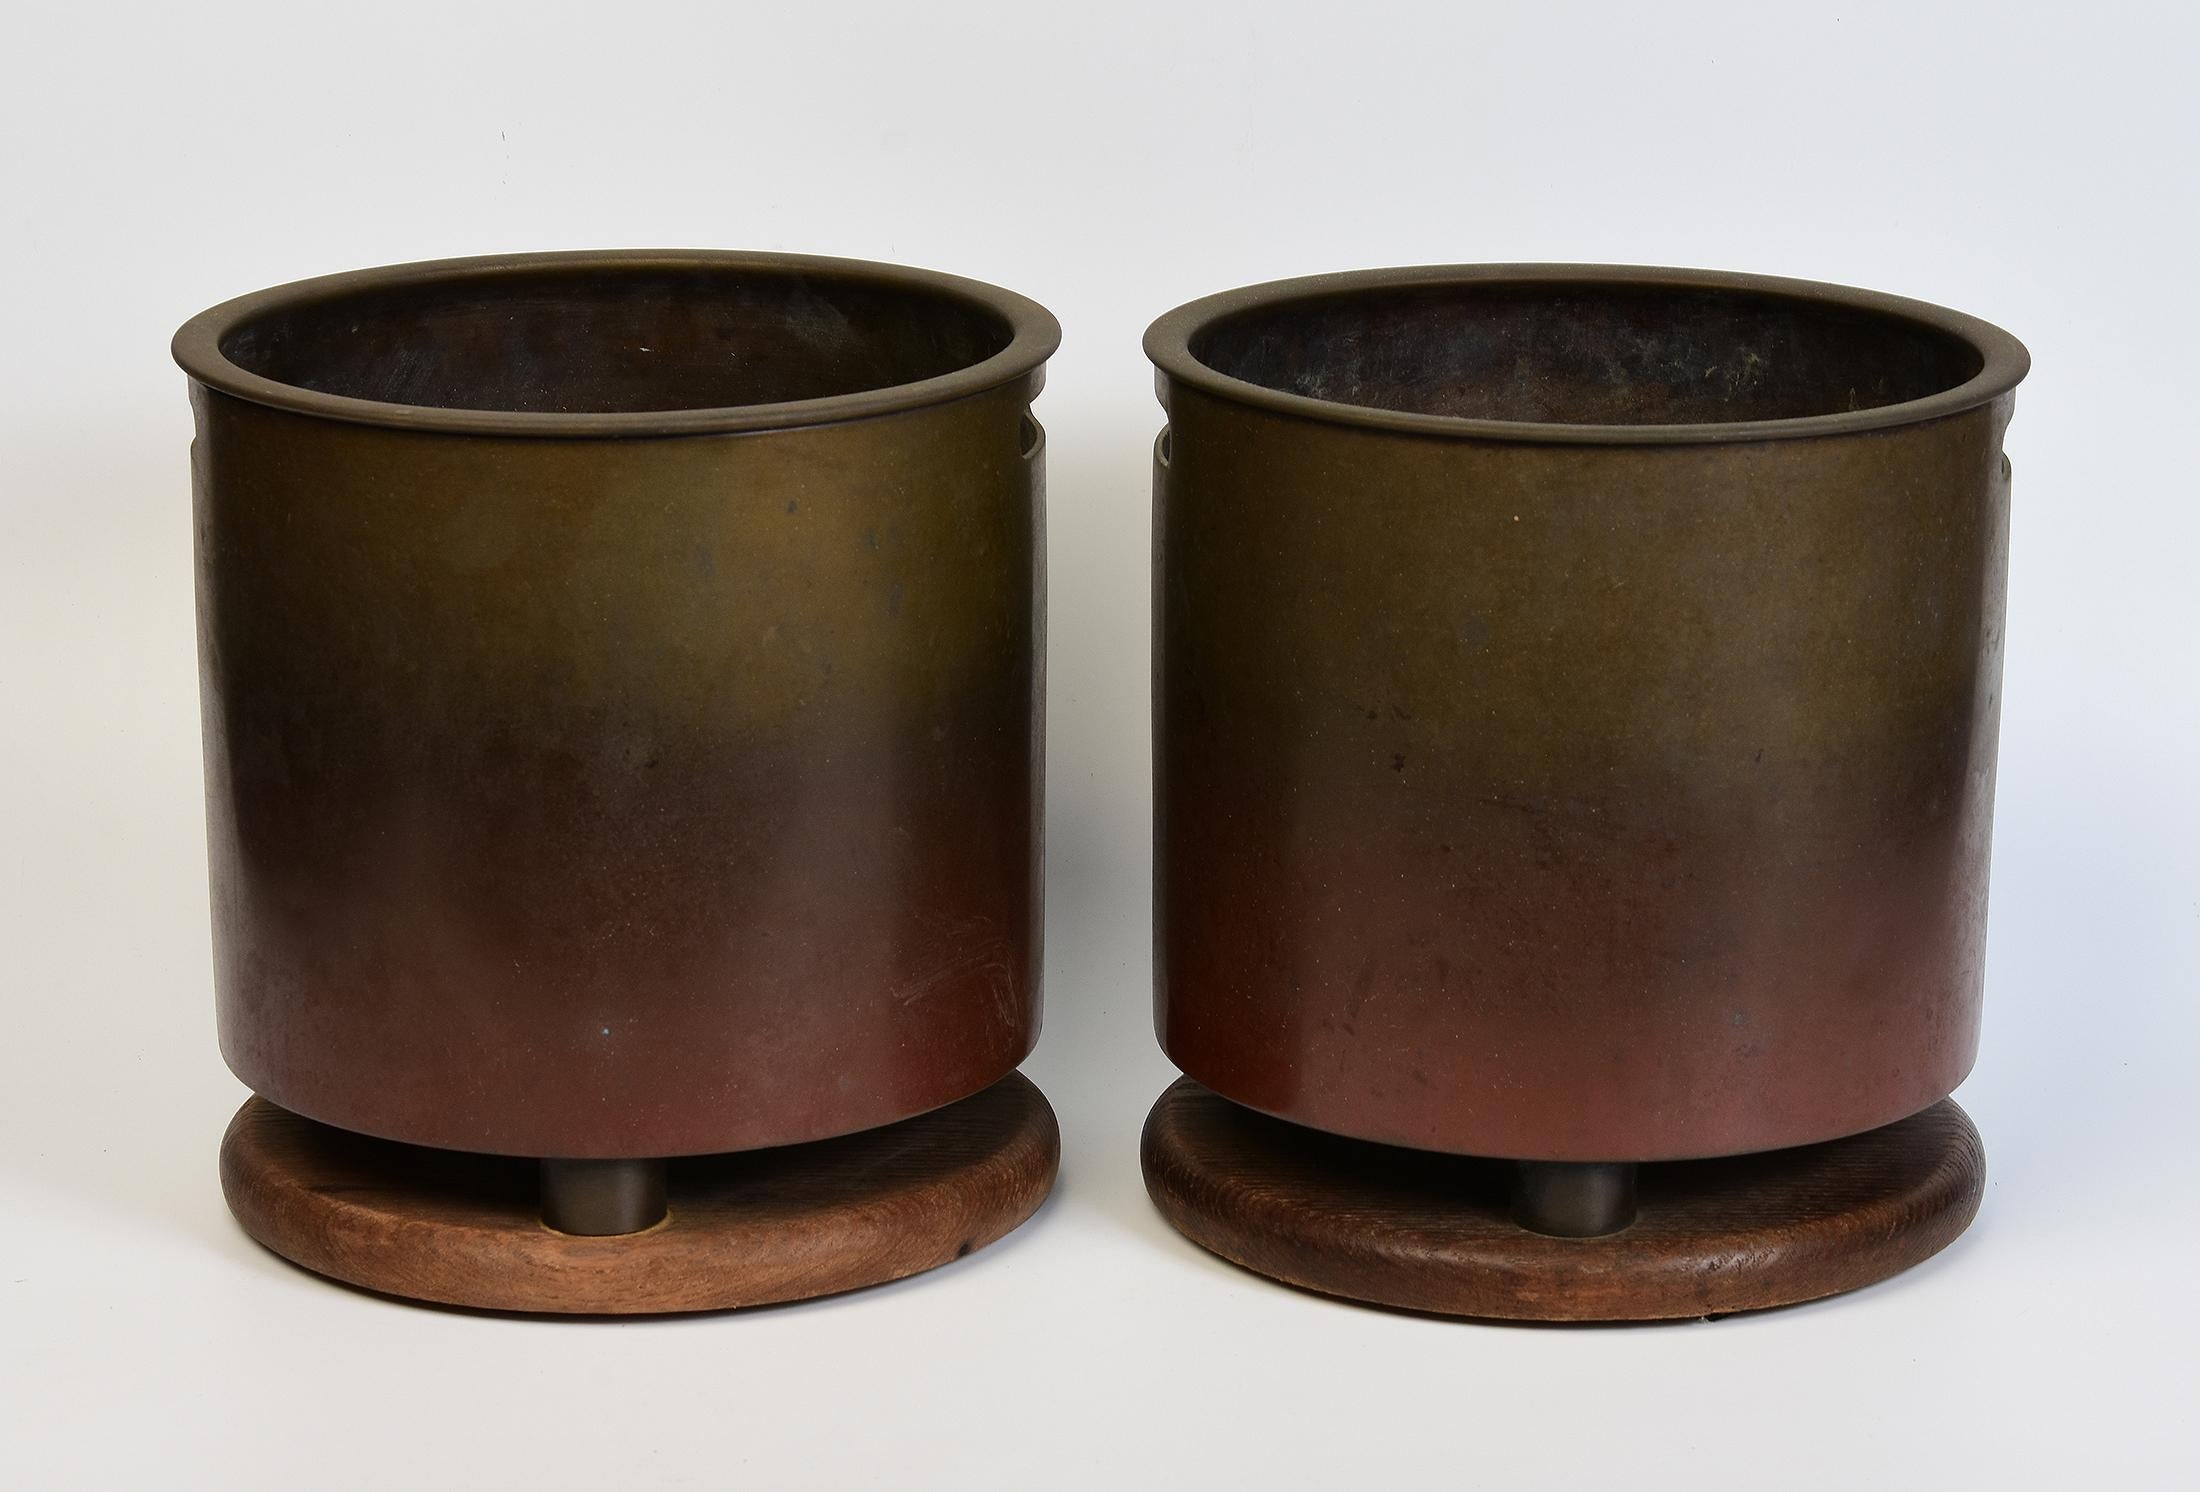 A pair of Antique Japanese old bronze Hibachi brazier pots.

Hibachi is a traditional Japanese heating device.

Age: Japan, Showa Period, Early 20th Century
Size: Height 26 C.M. / Diameter 25.2 C.M.
Condition: Nice condition overall (some expected